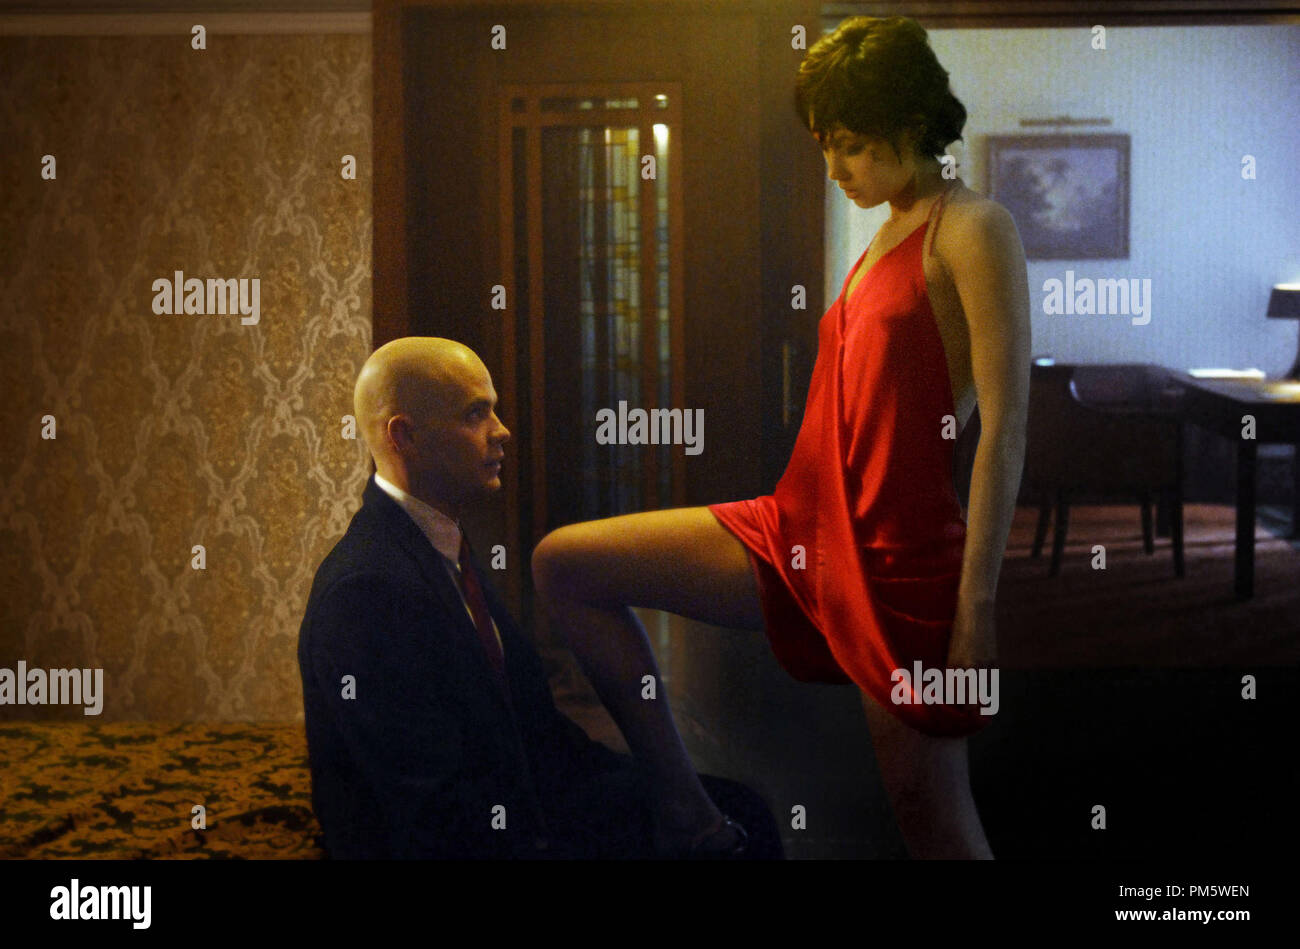 Studio Publicity Still from 'Hitman' Timothy Olyphant, Olga Kurylenko © 2007 20th Century Fox    File Reference # 307381037THA  For Editorial Use Only -  All Rights Reserved Stock Photo